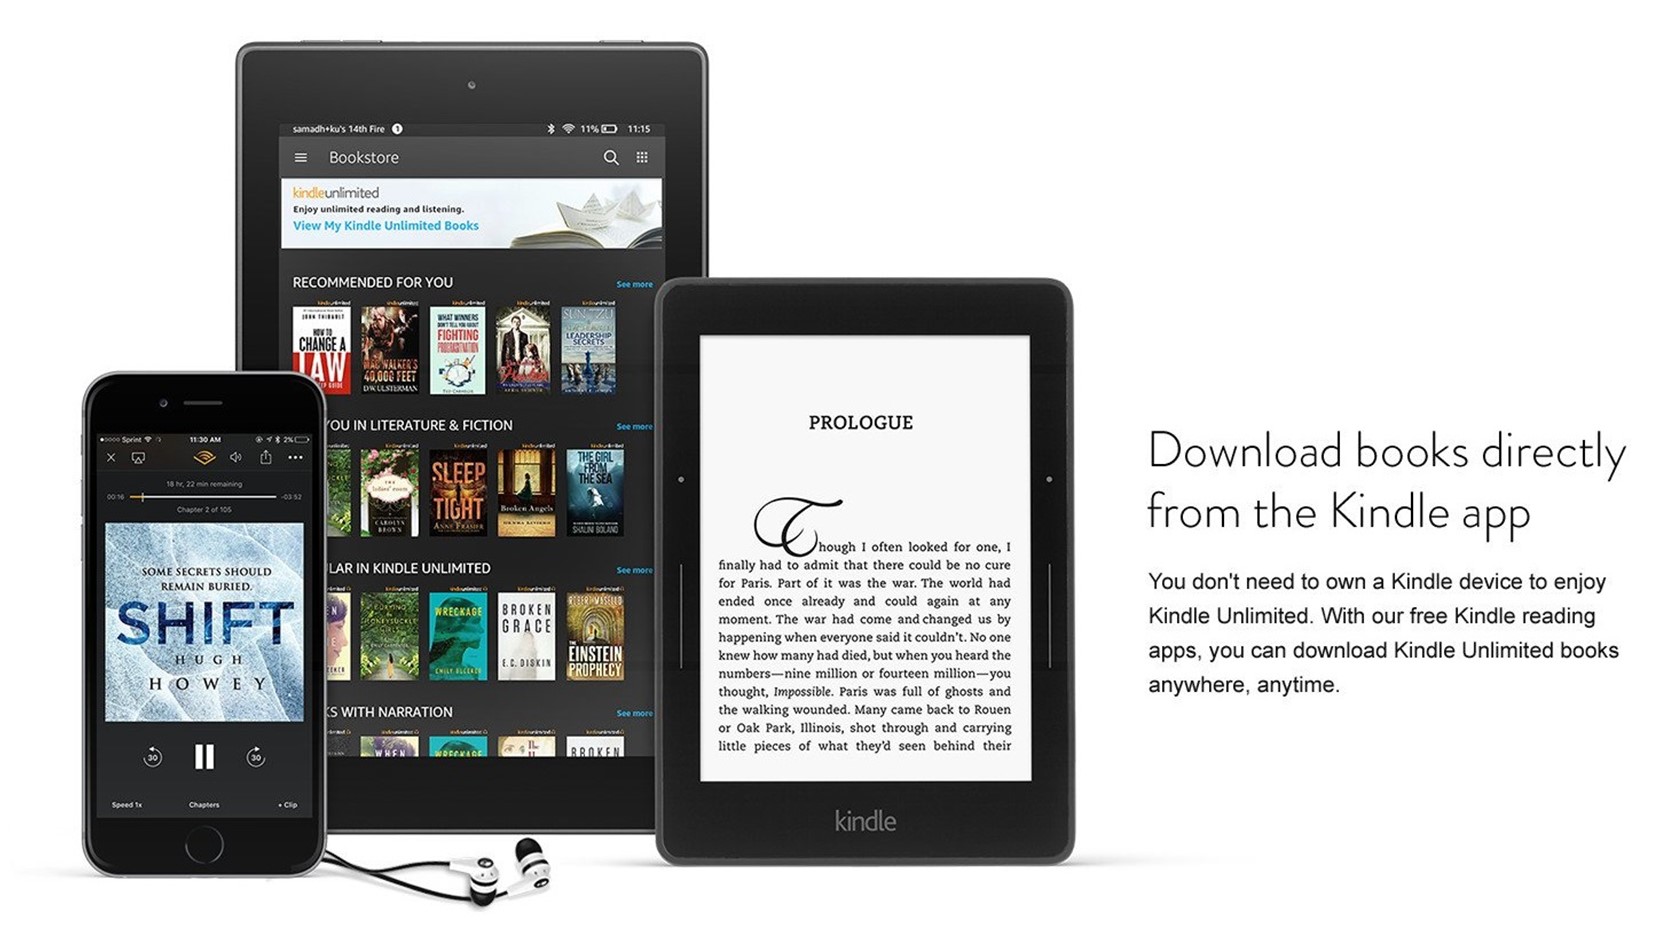 Kindle Unlimited Homepage showing the service on devices